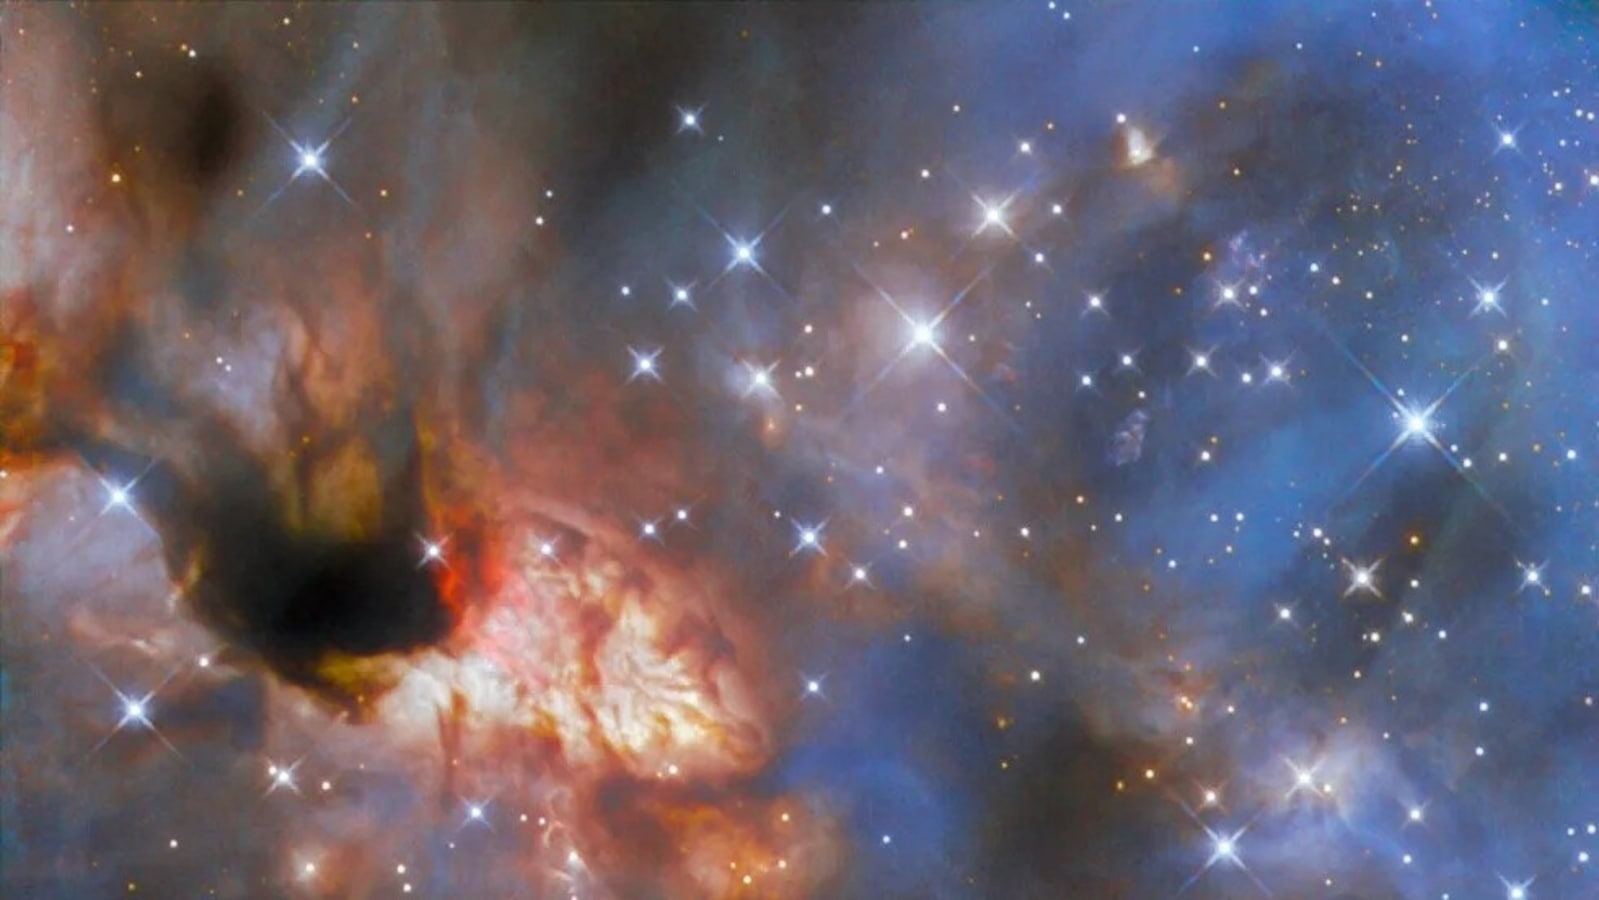 NASA’s Hubble House Telescope graphic reveals significant star delivery in celestial tapestry